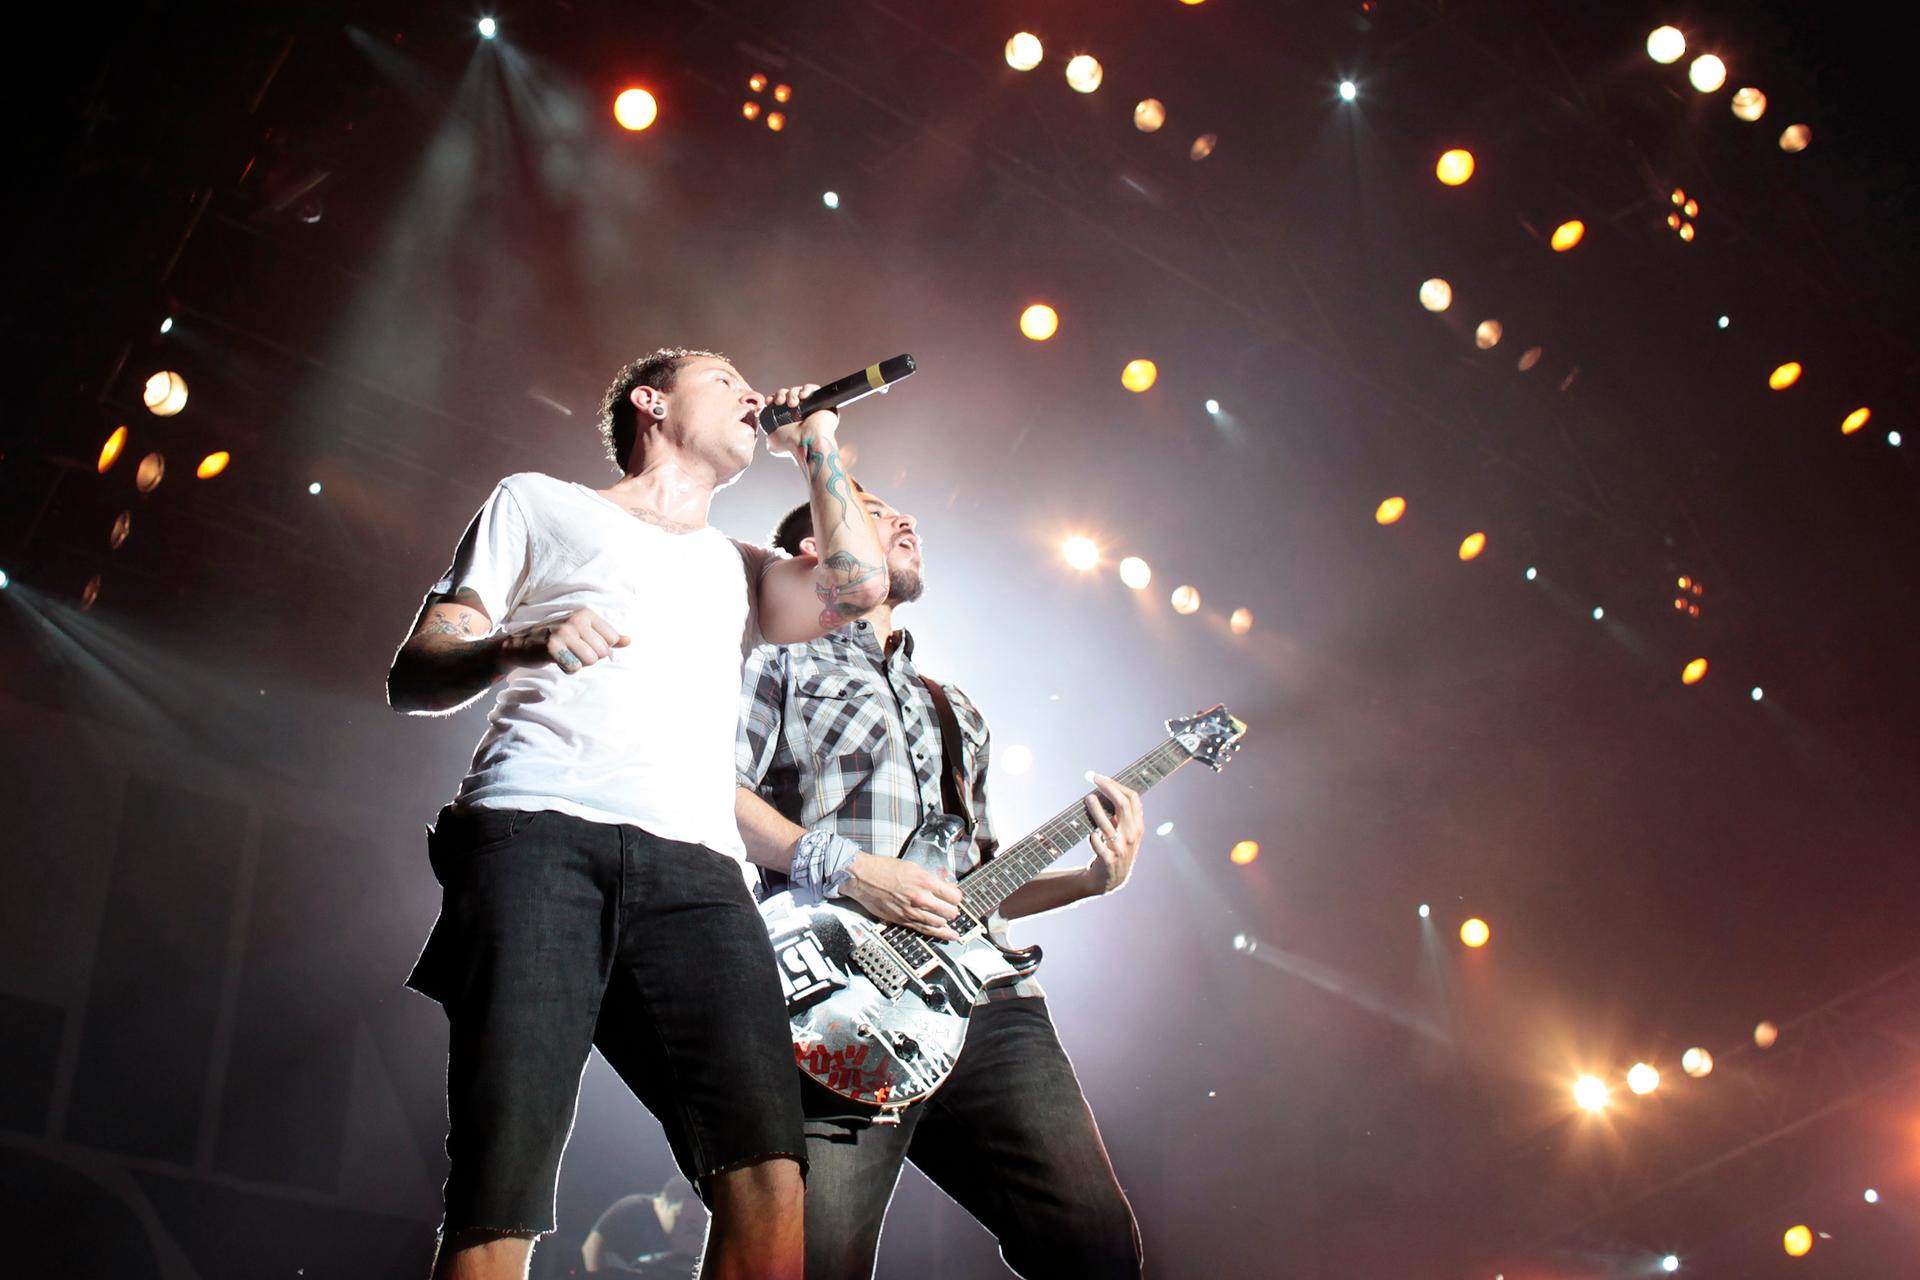 Linkin Park's frontman Chester Bennington (L) and Mike Shinoda perform at a concert in Shanghai August 15, 2009.